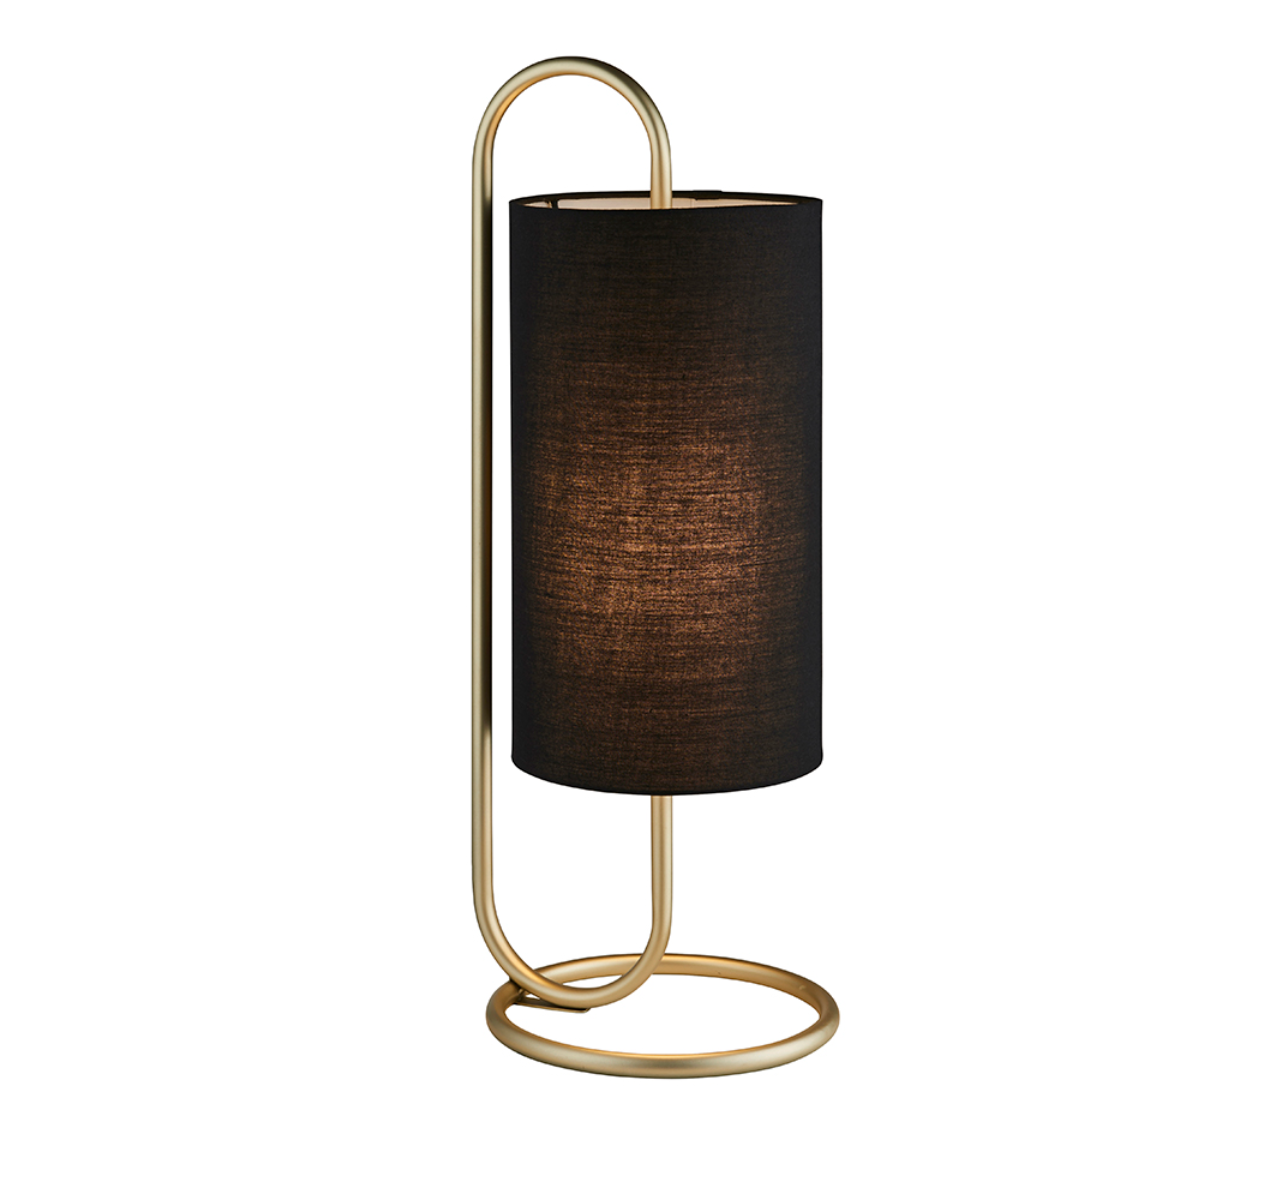 Oval structural antique brass table light with black fabric shade - ID 11391